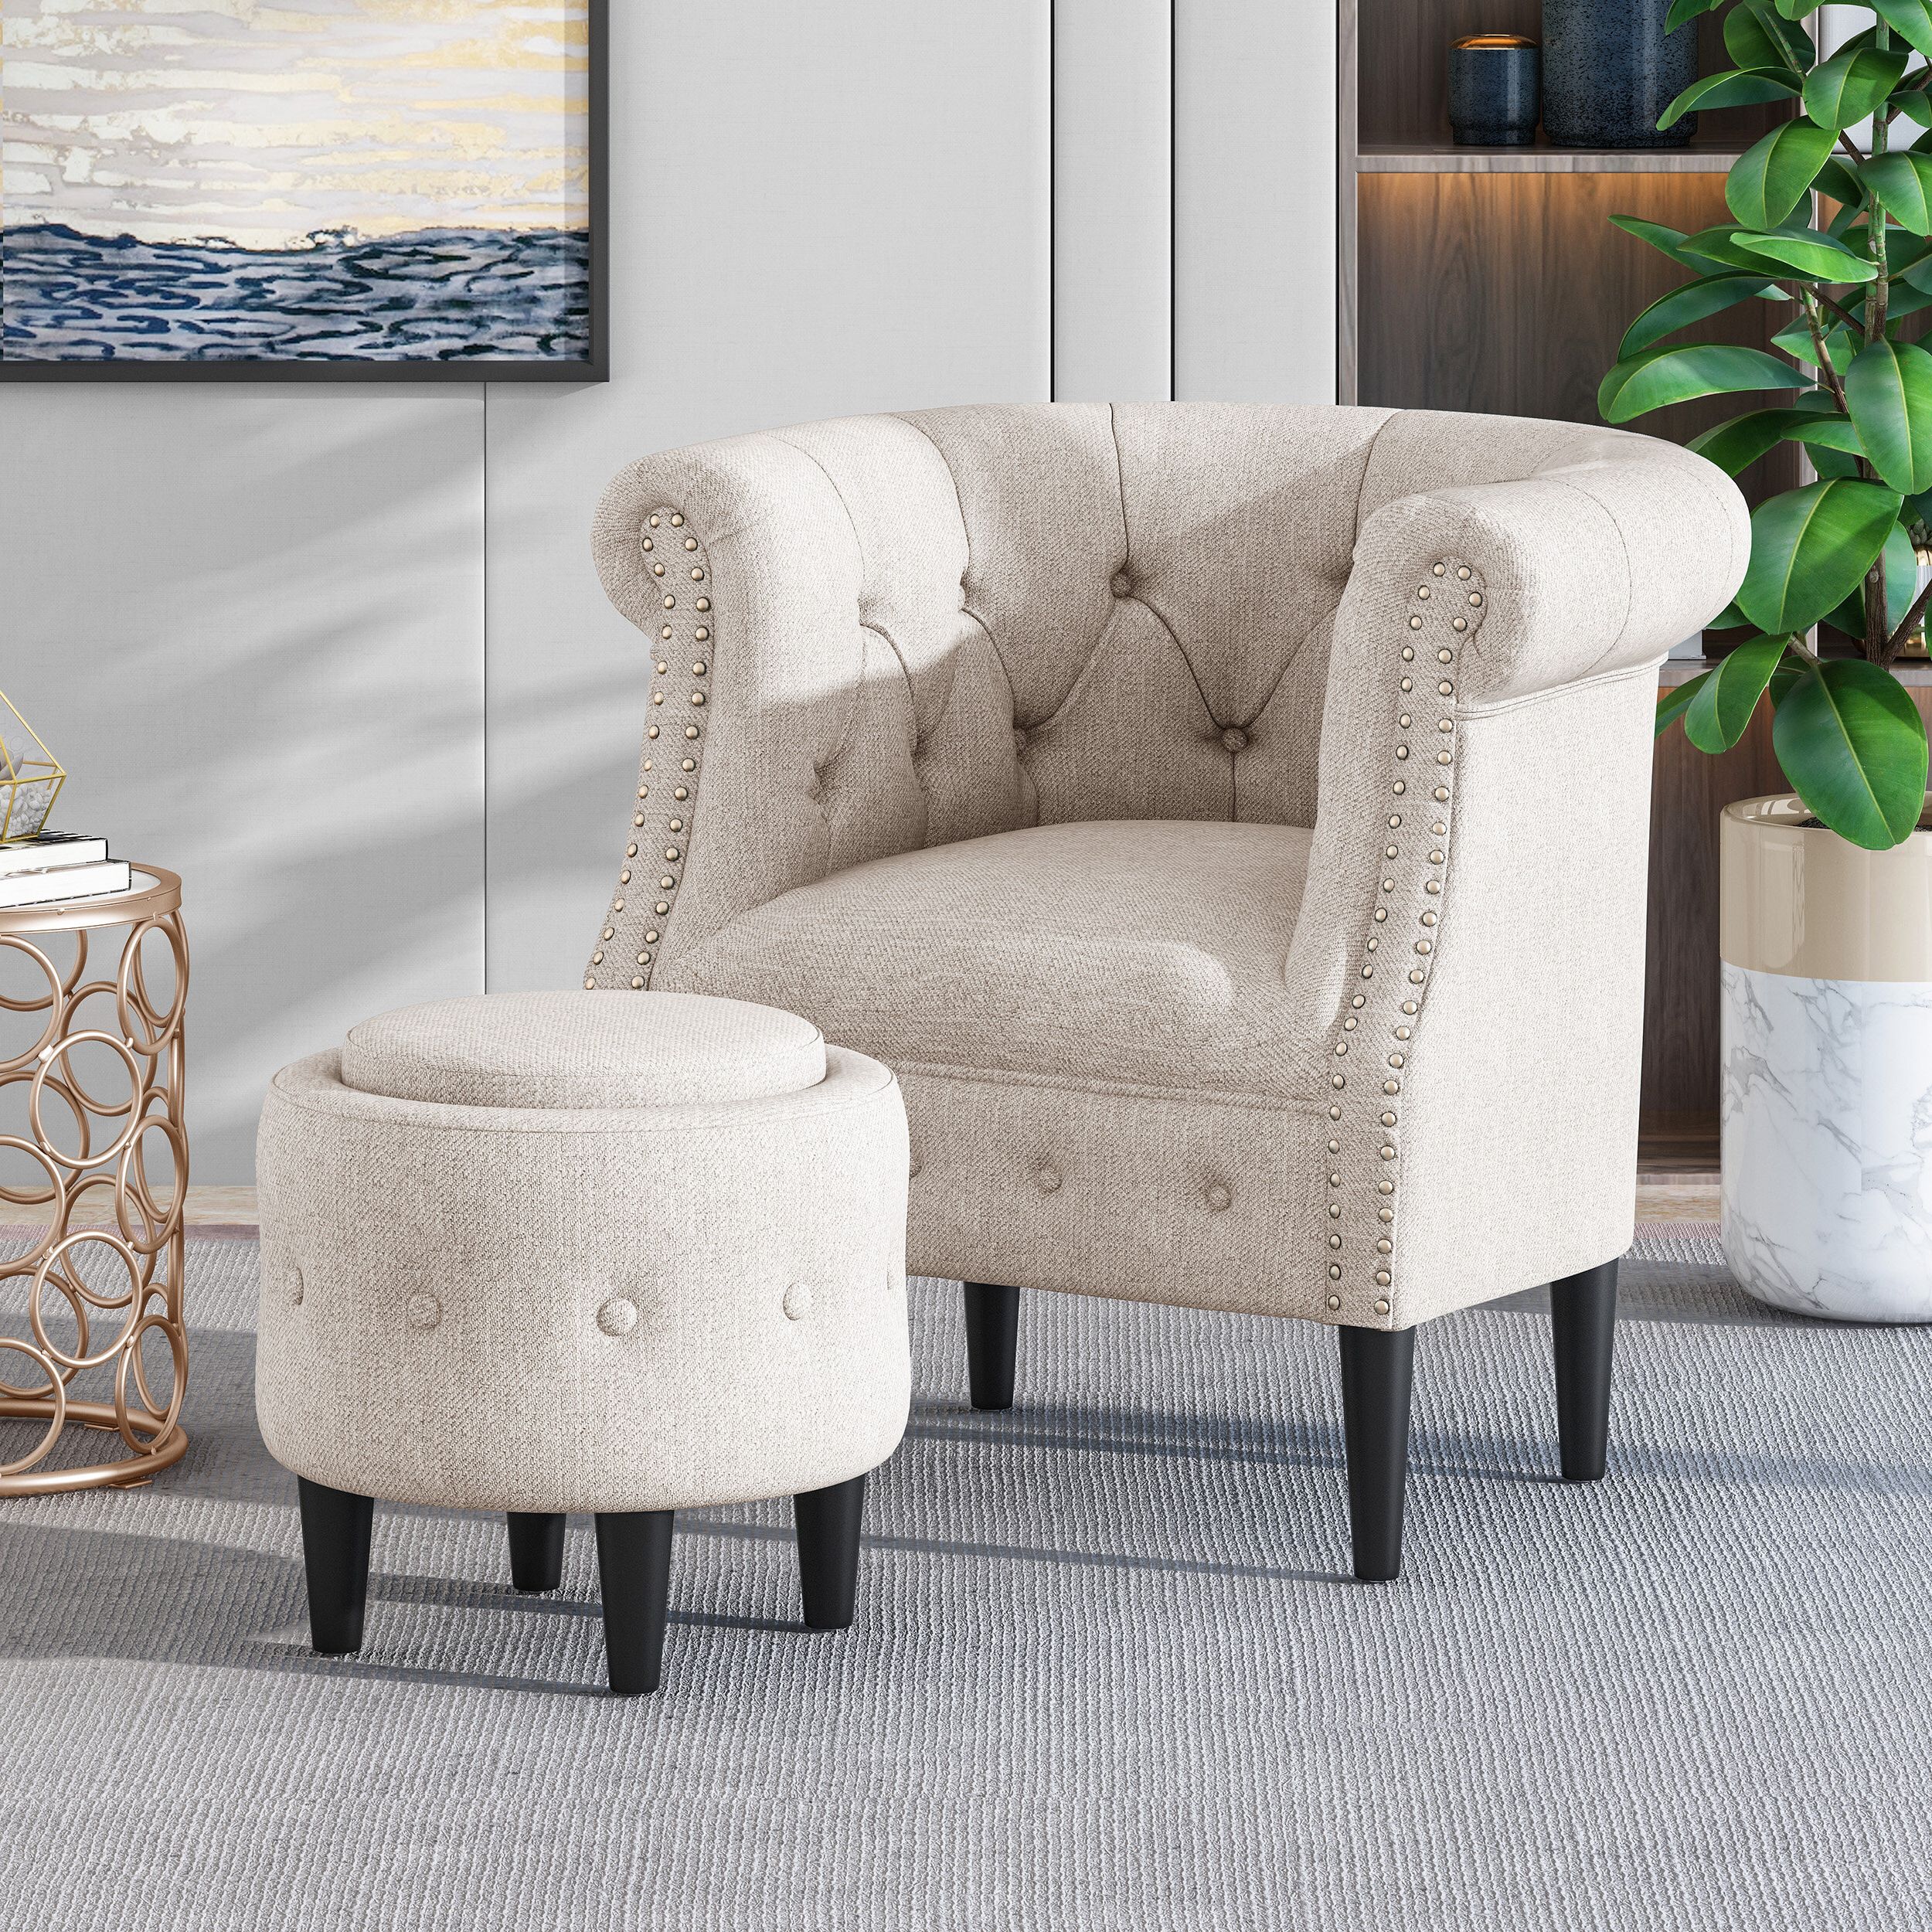 Favorite Starks Tufted Fabric Chesterfield Chair And Ottoman Sets In Rosdorf Park Starks Tufted Fabric Chesterfield Chair And (View 1 of 20)